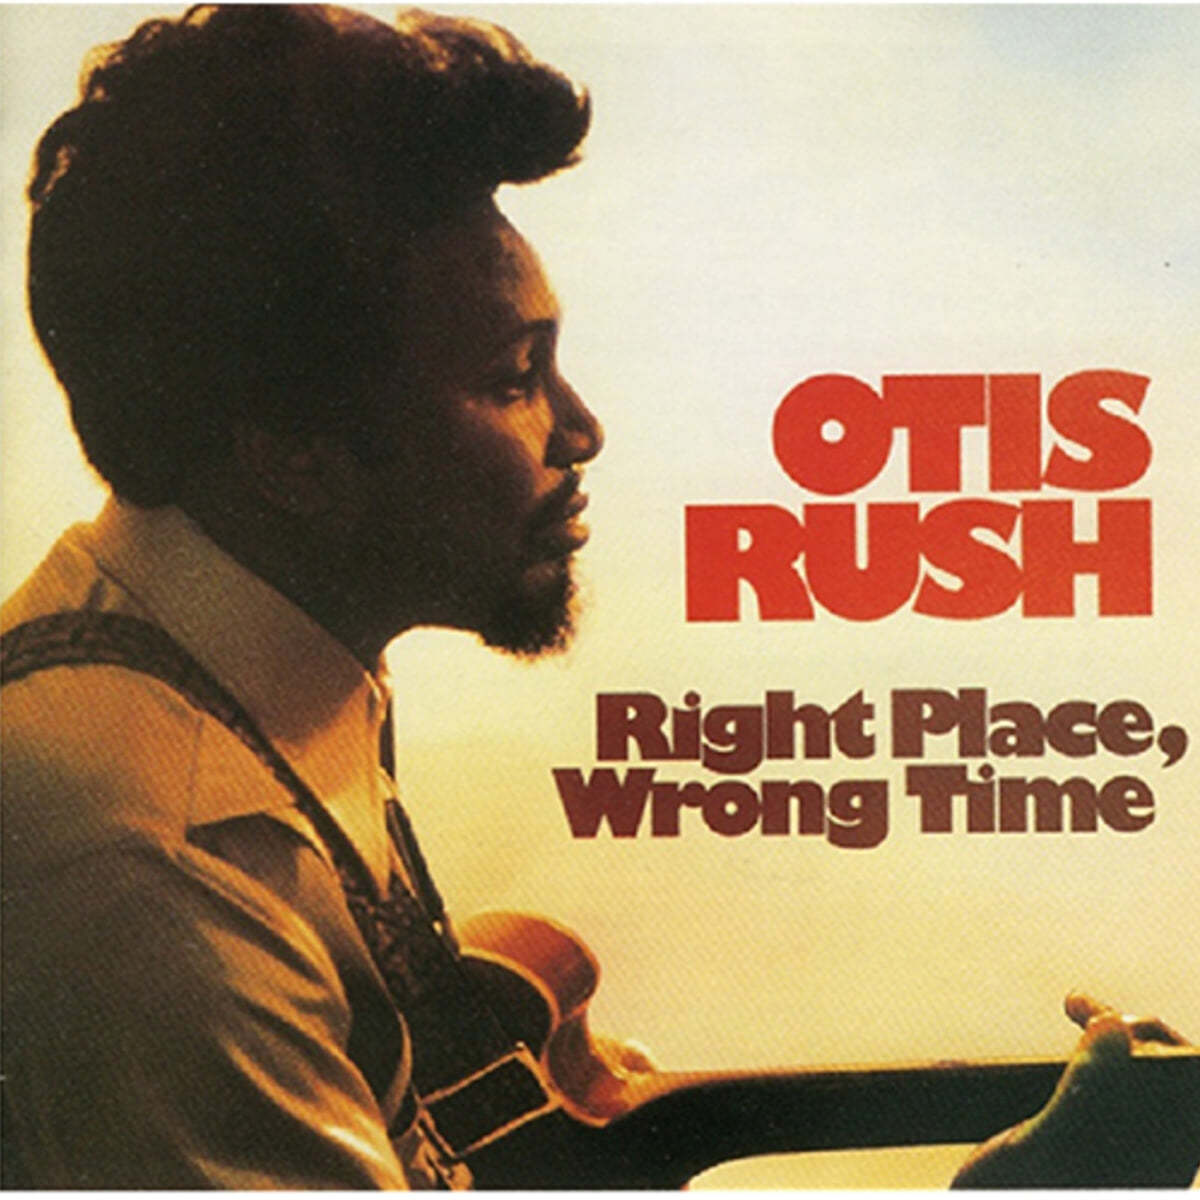 Otis Rush (오티스 러쉬) - Right Place, Wrong Time [LP]